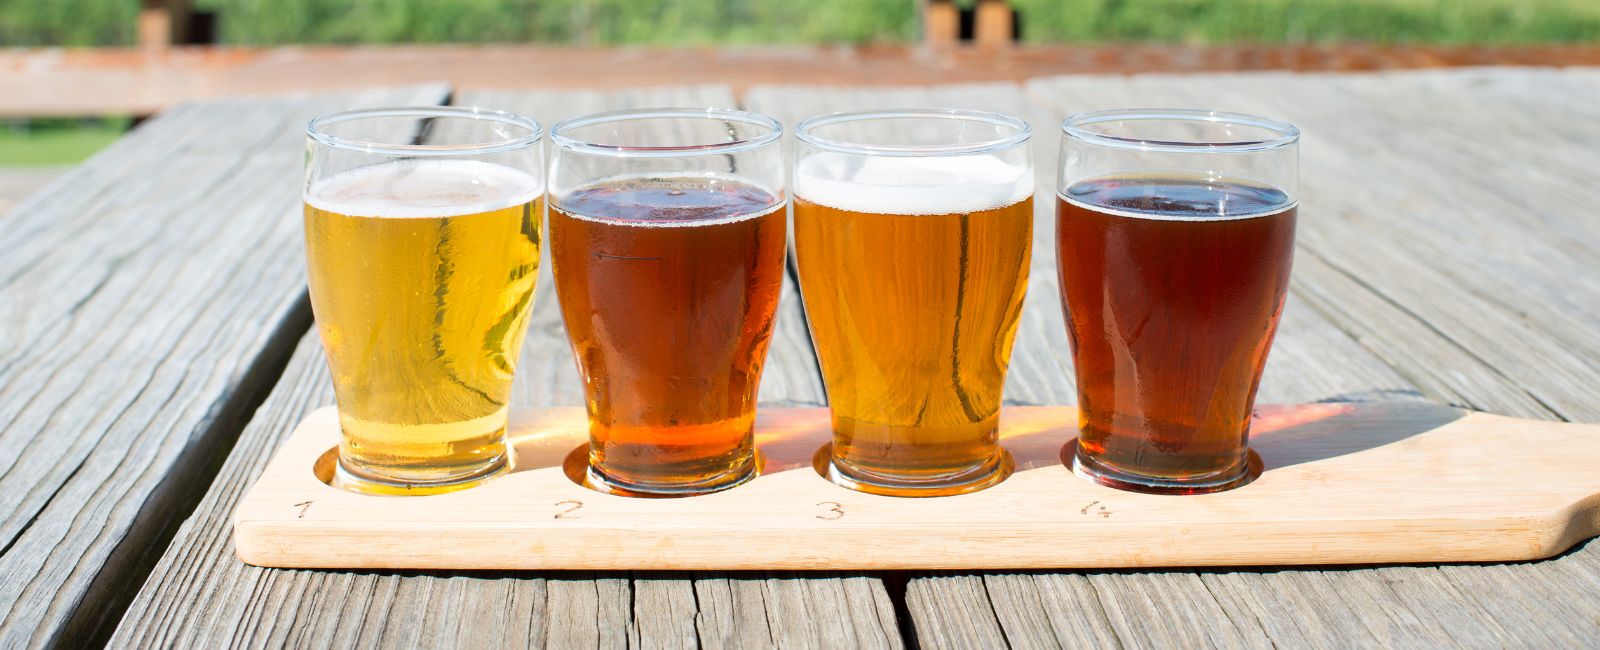 flight of four beer flavors on a wooden table outside